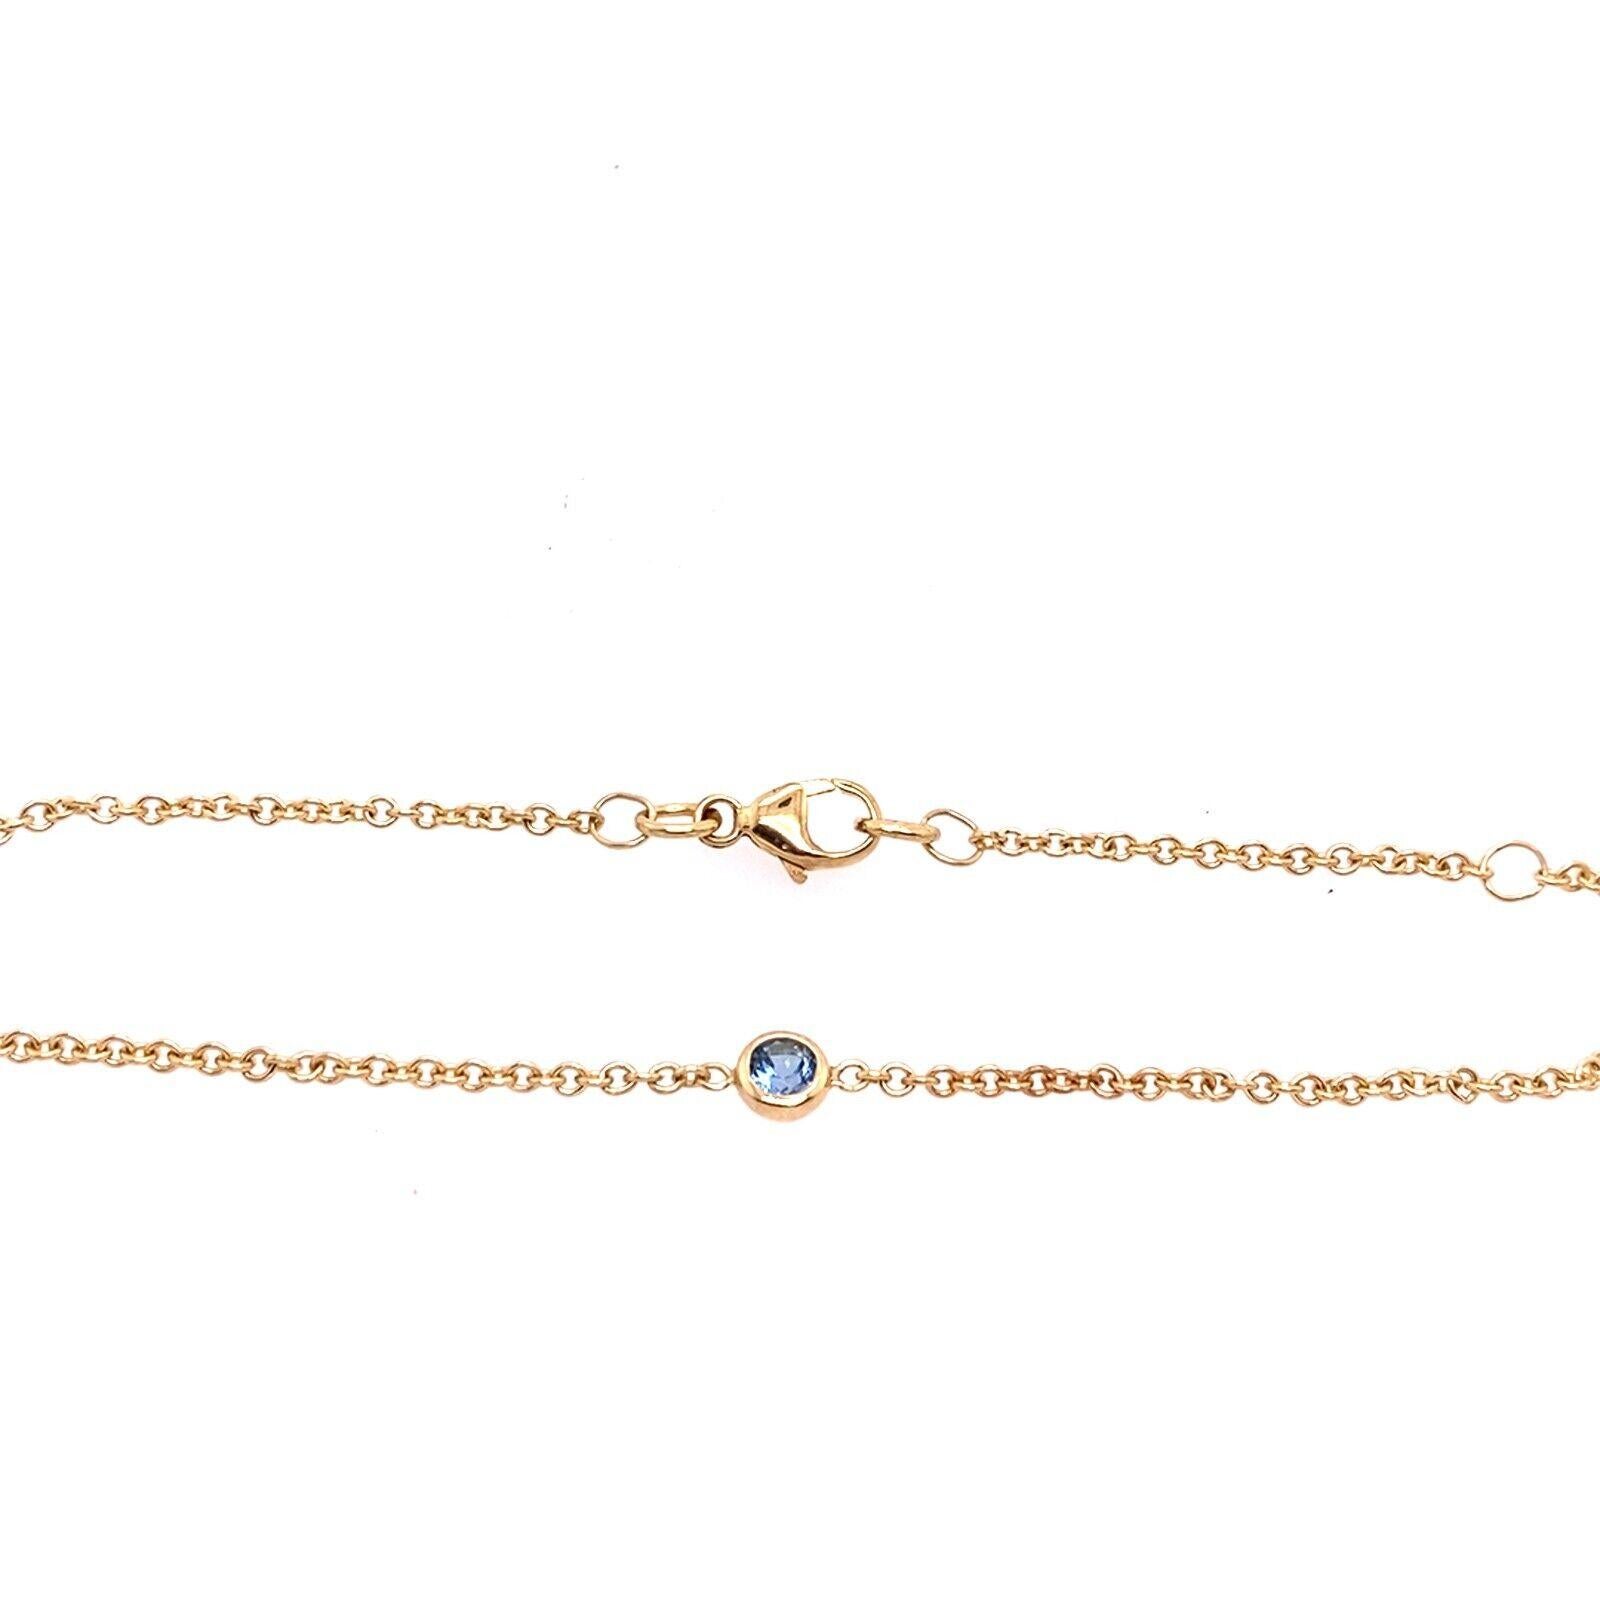 This March birthstone bracelet set, crafted in 9ct Yellow Gold is the perfect gift to celebrate one’s birth month. The bracelet comes with 1 round-cut aquamarine gemstone, which is the birthstone for March, and a lobster clasp for easy